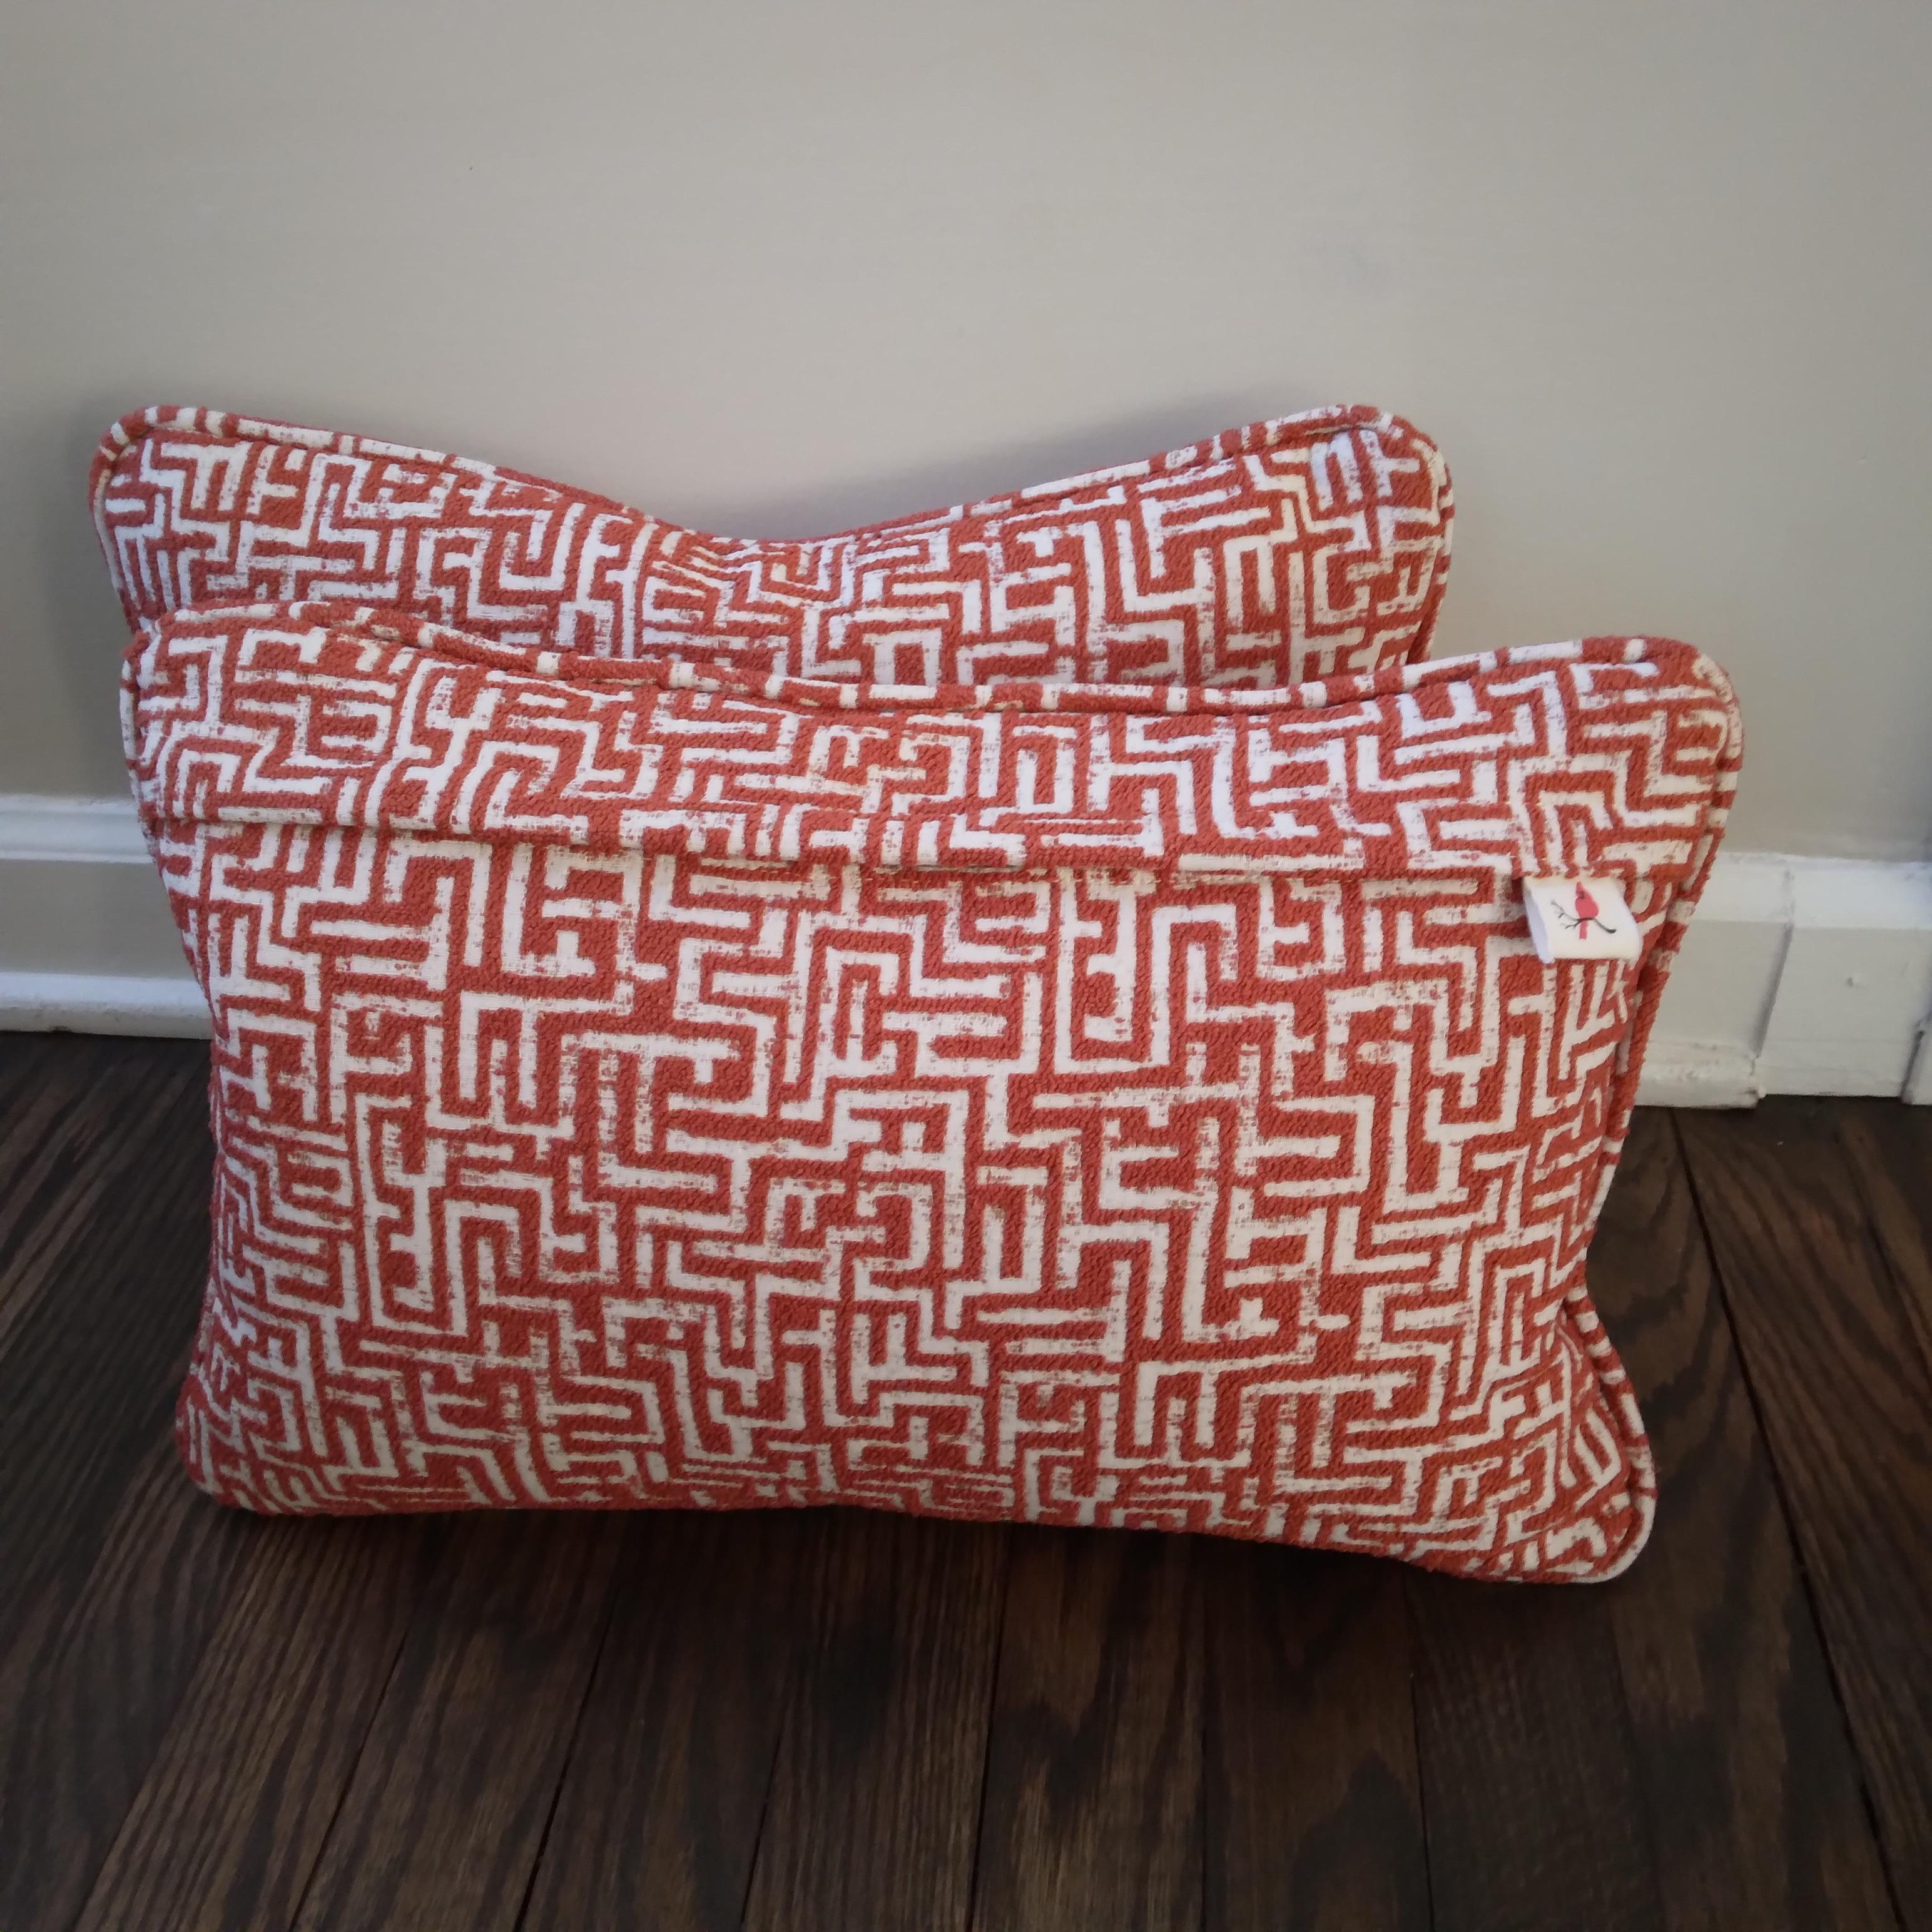 Polyester Kuba-inspired Geometric Jacquard Accent Pillows in Orange and White - a pair  For Sale